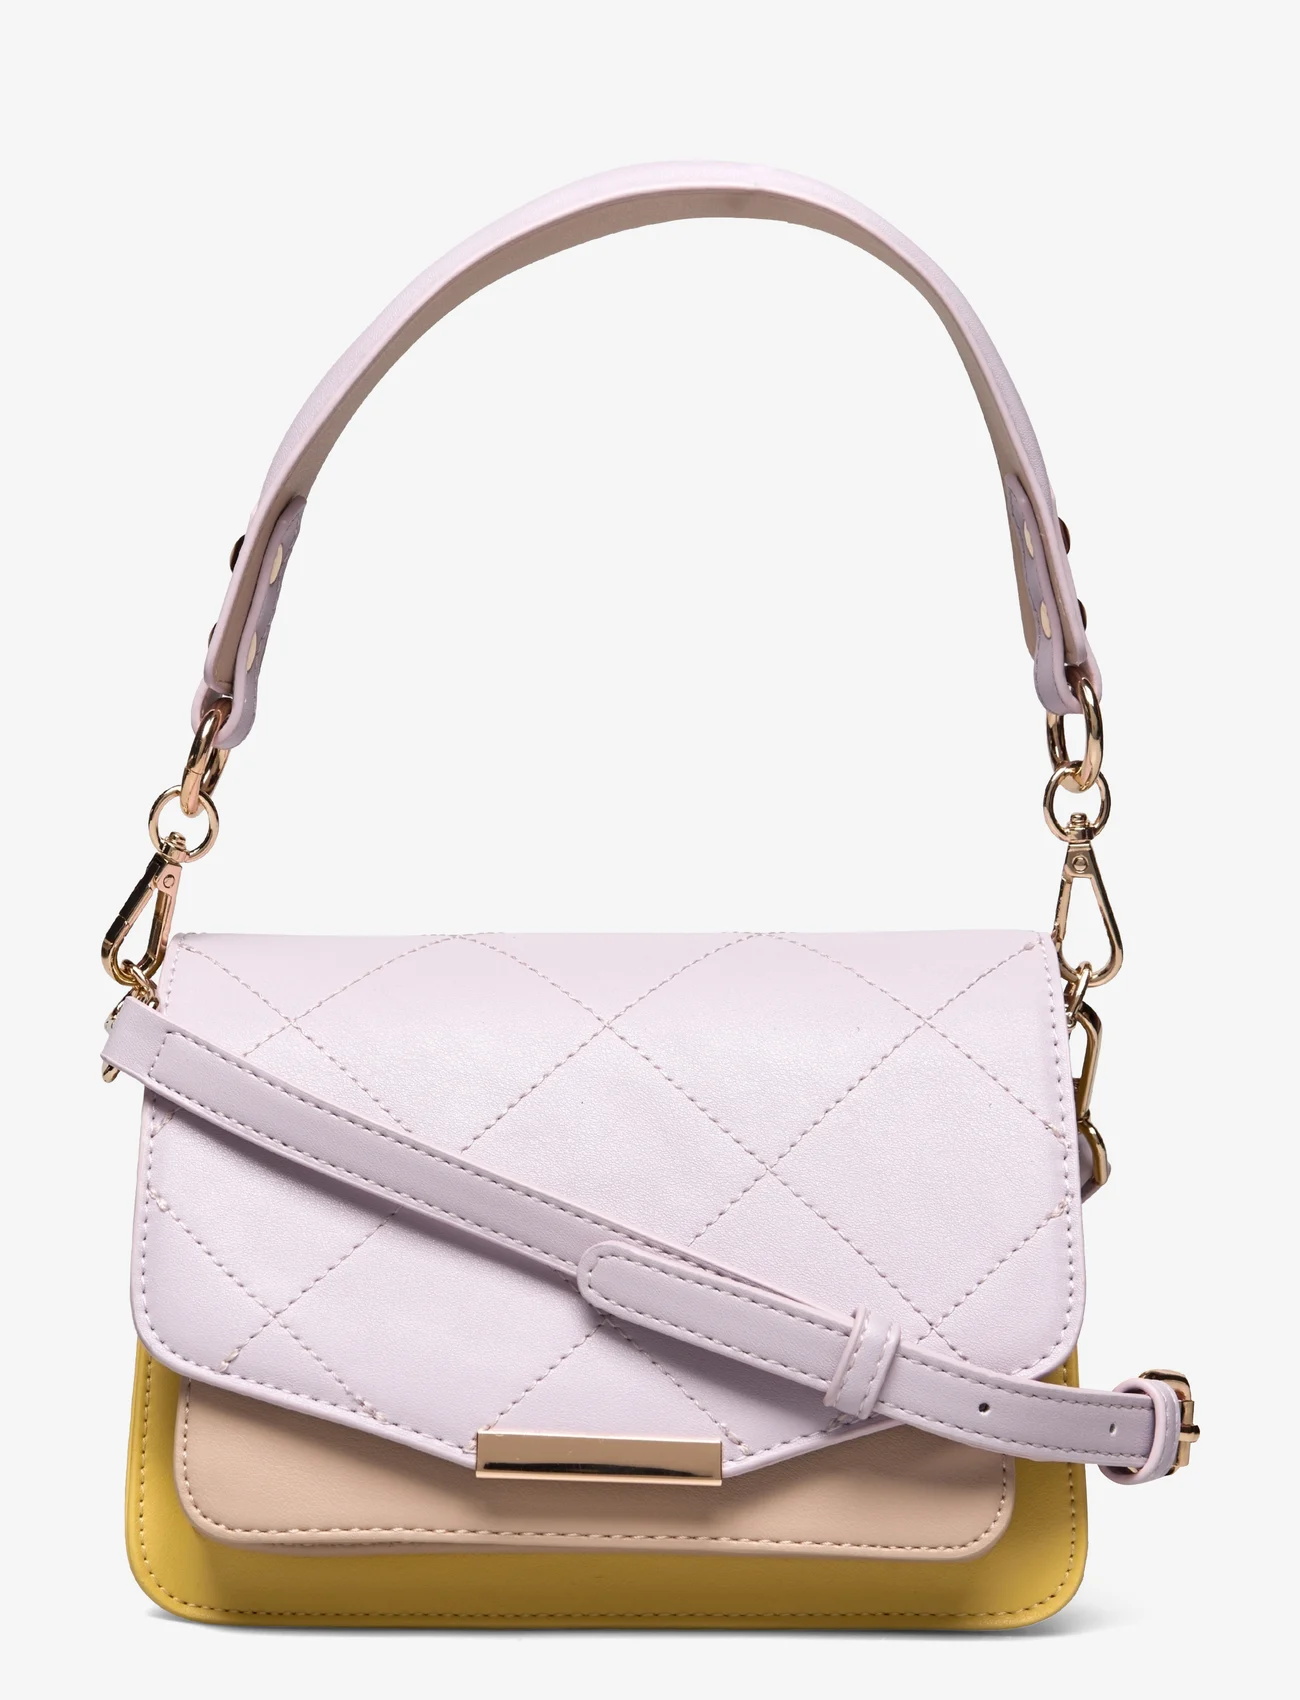 Noella - Blanca Bag Medium - party wear at outlet prices - soft/purple/yellow - 0